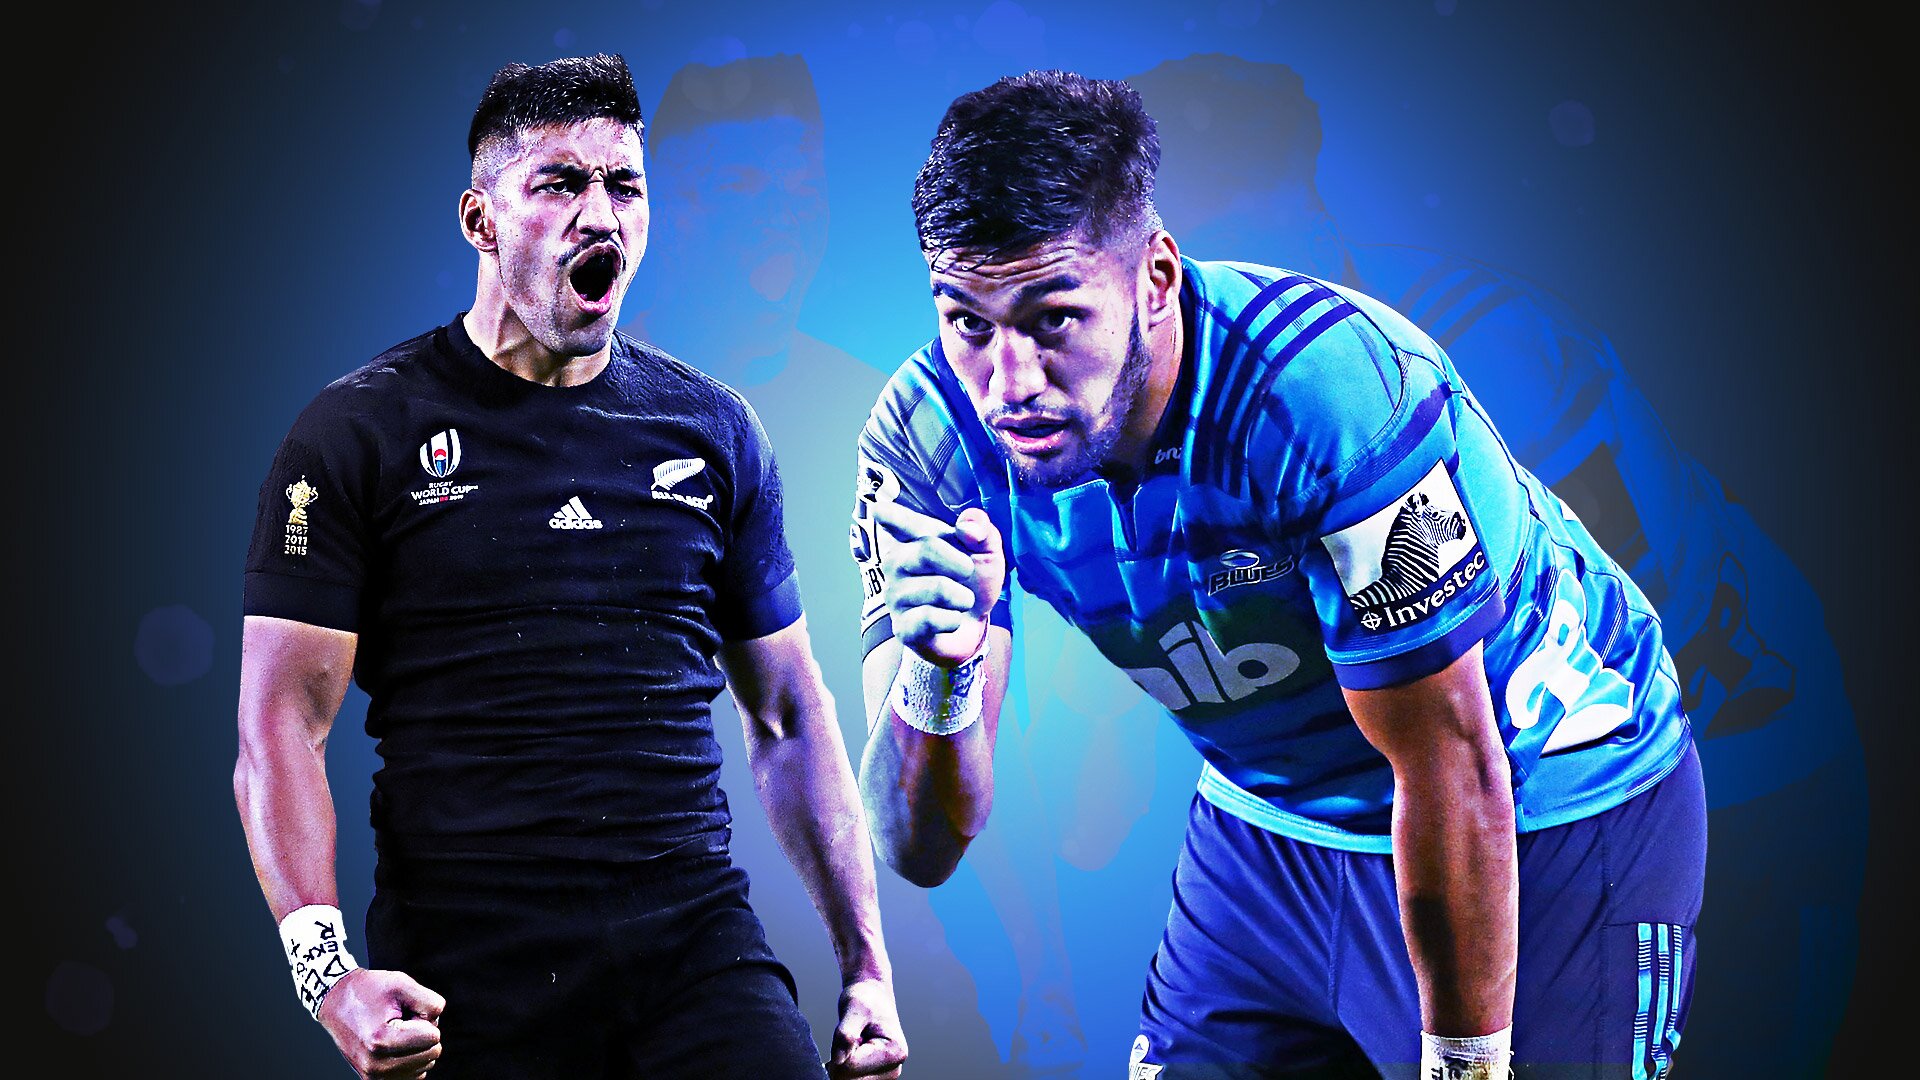 Analysis: The one area of Rieko Ioane's game that needs fixing before he can become an international centre